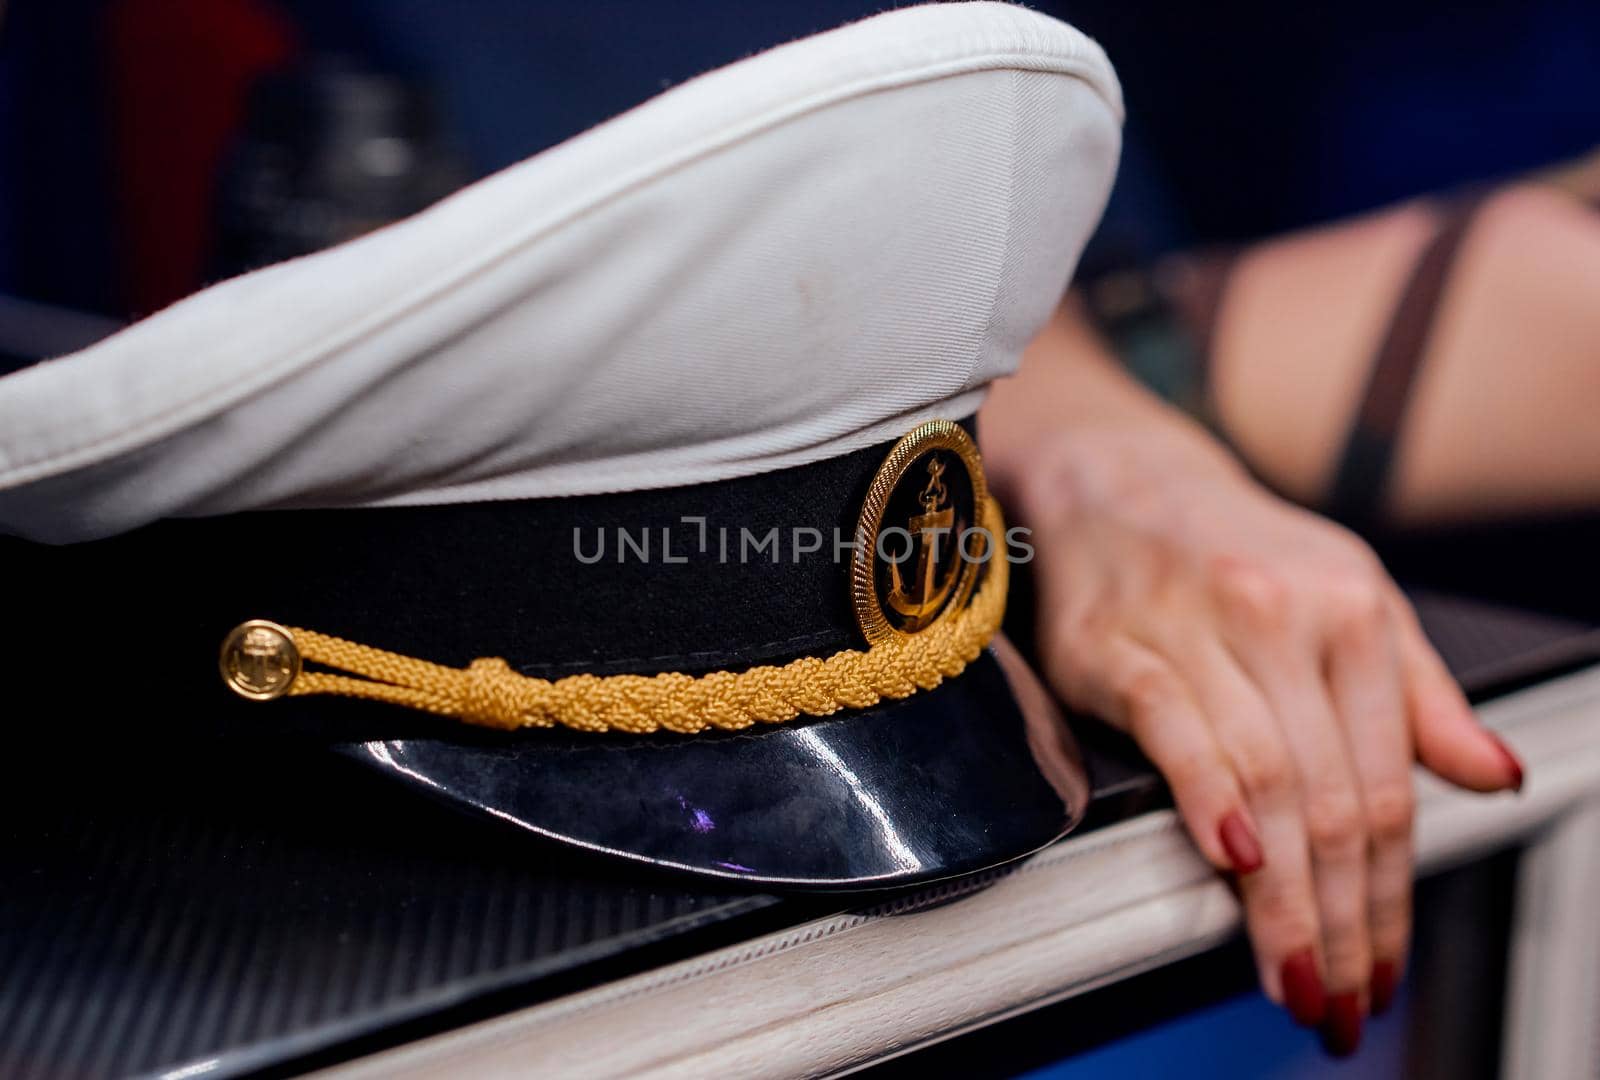 sailor's cap on the shelf of the woman's hand next to by AntonIlchanka